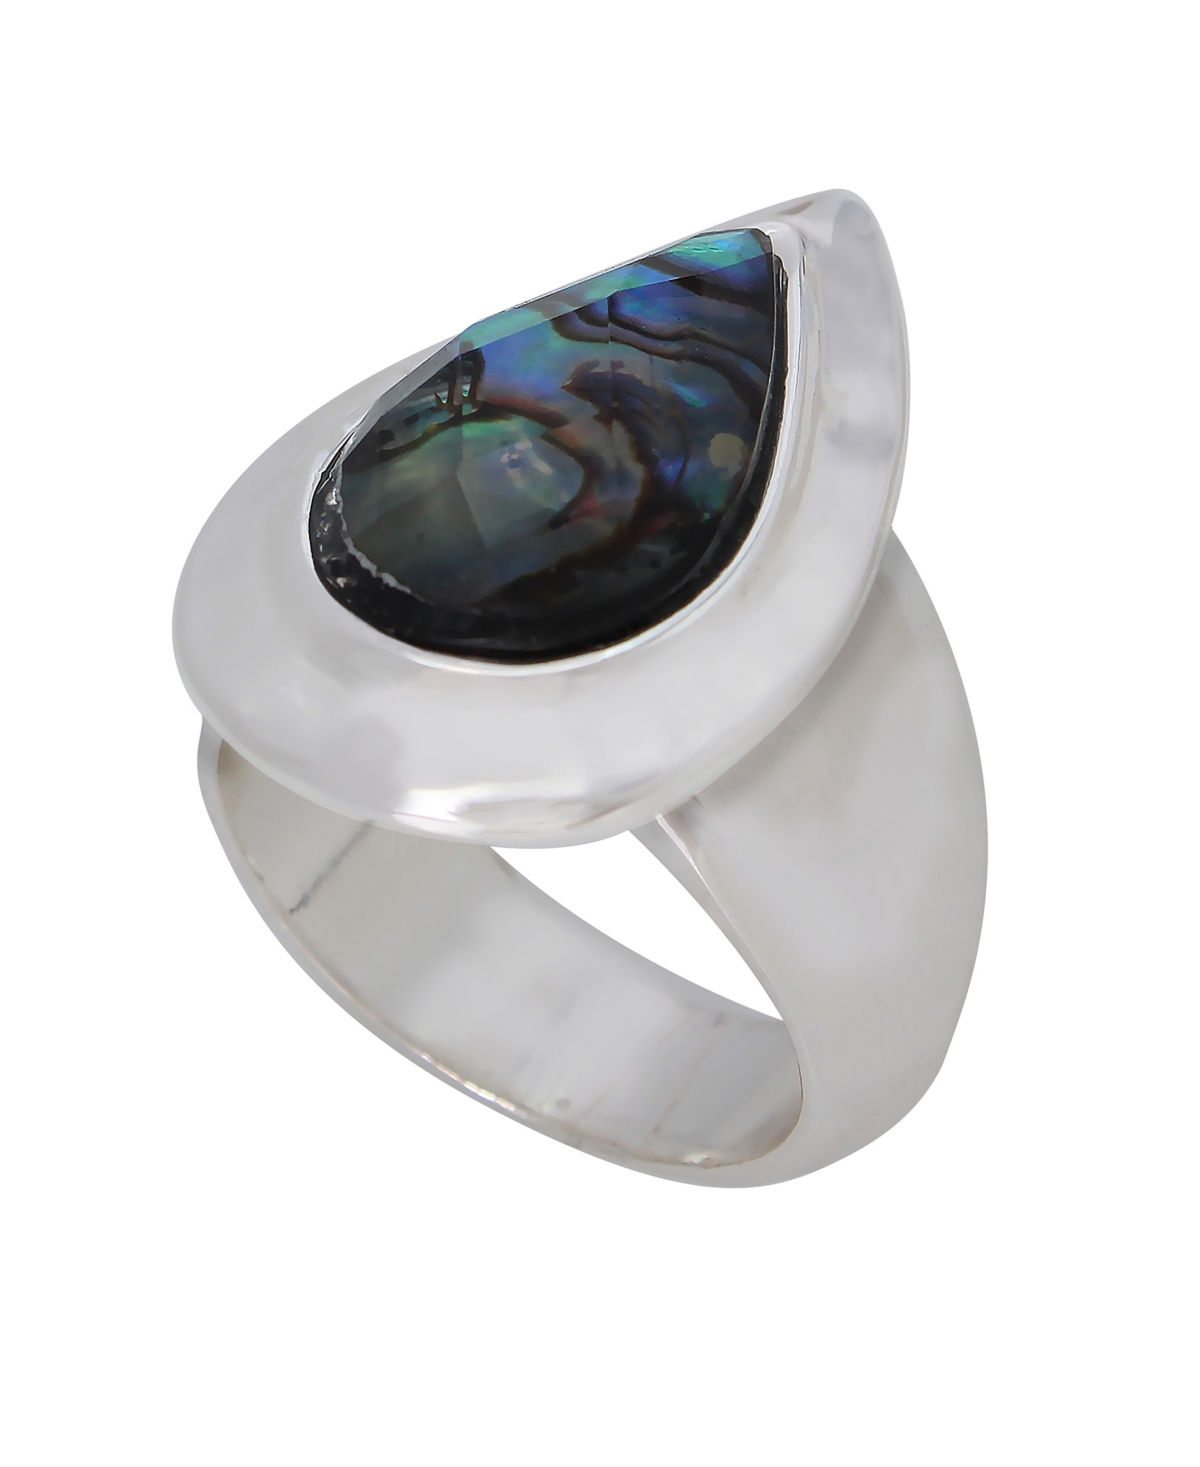 Abalone Cocktail Ring - Abalone